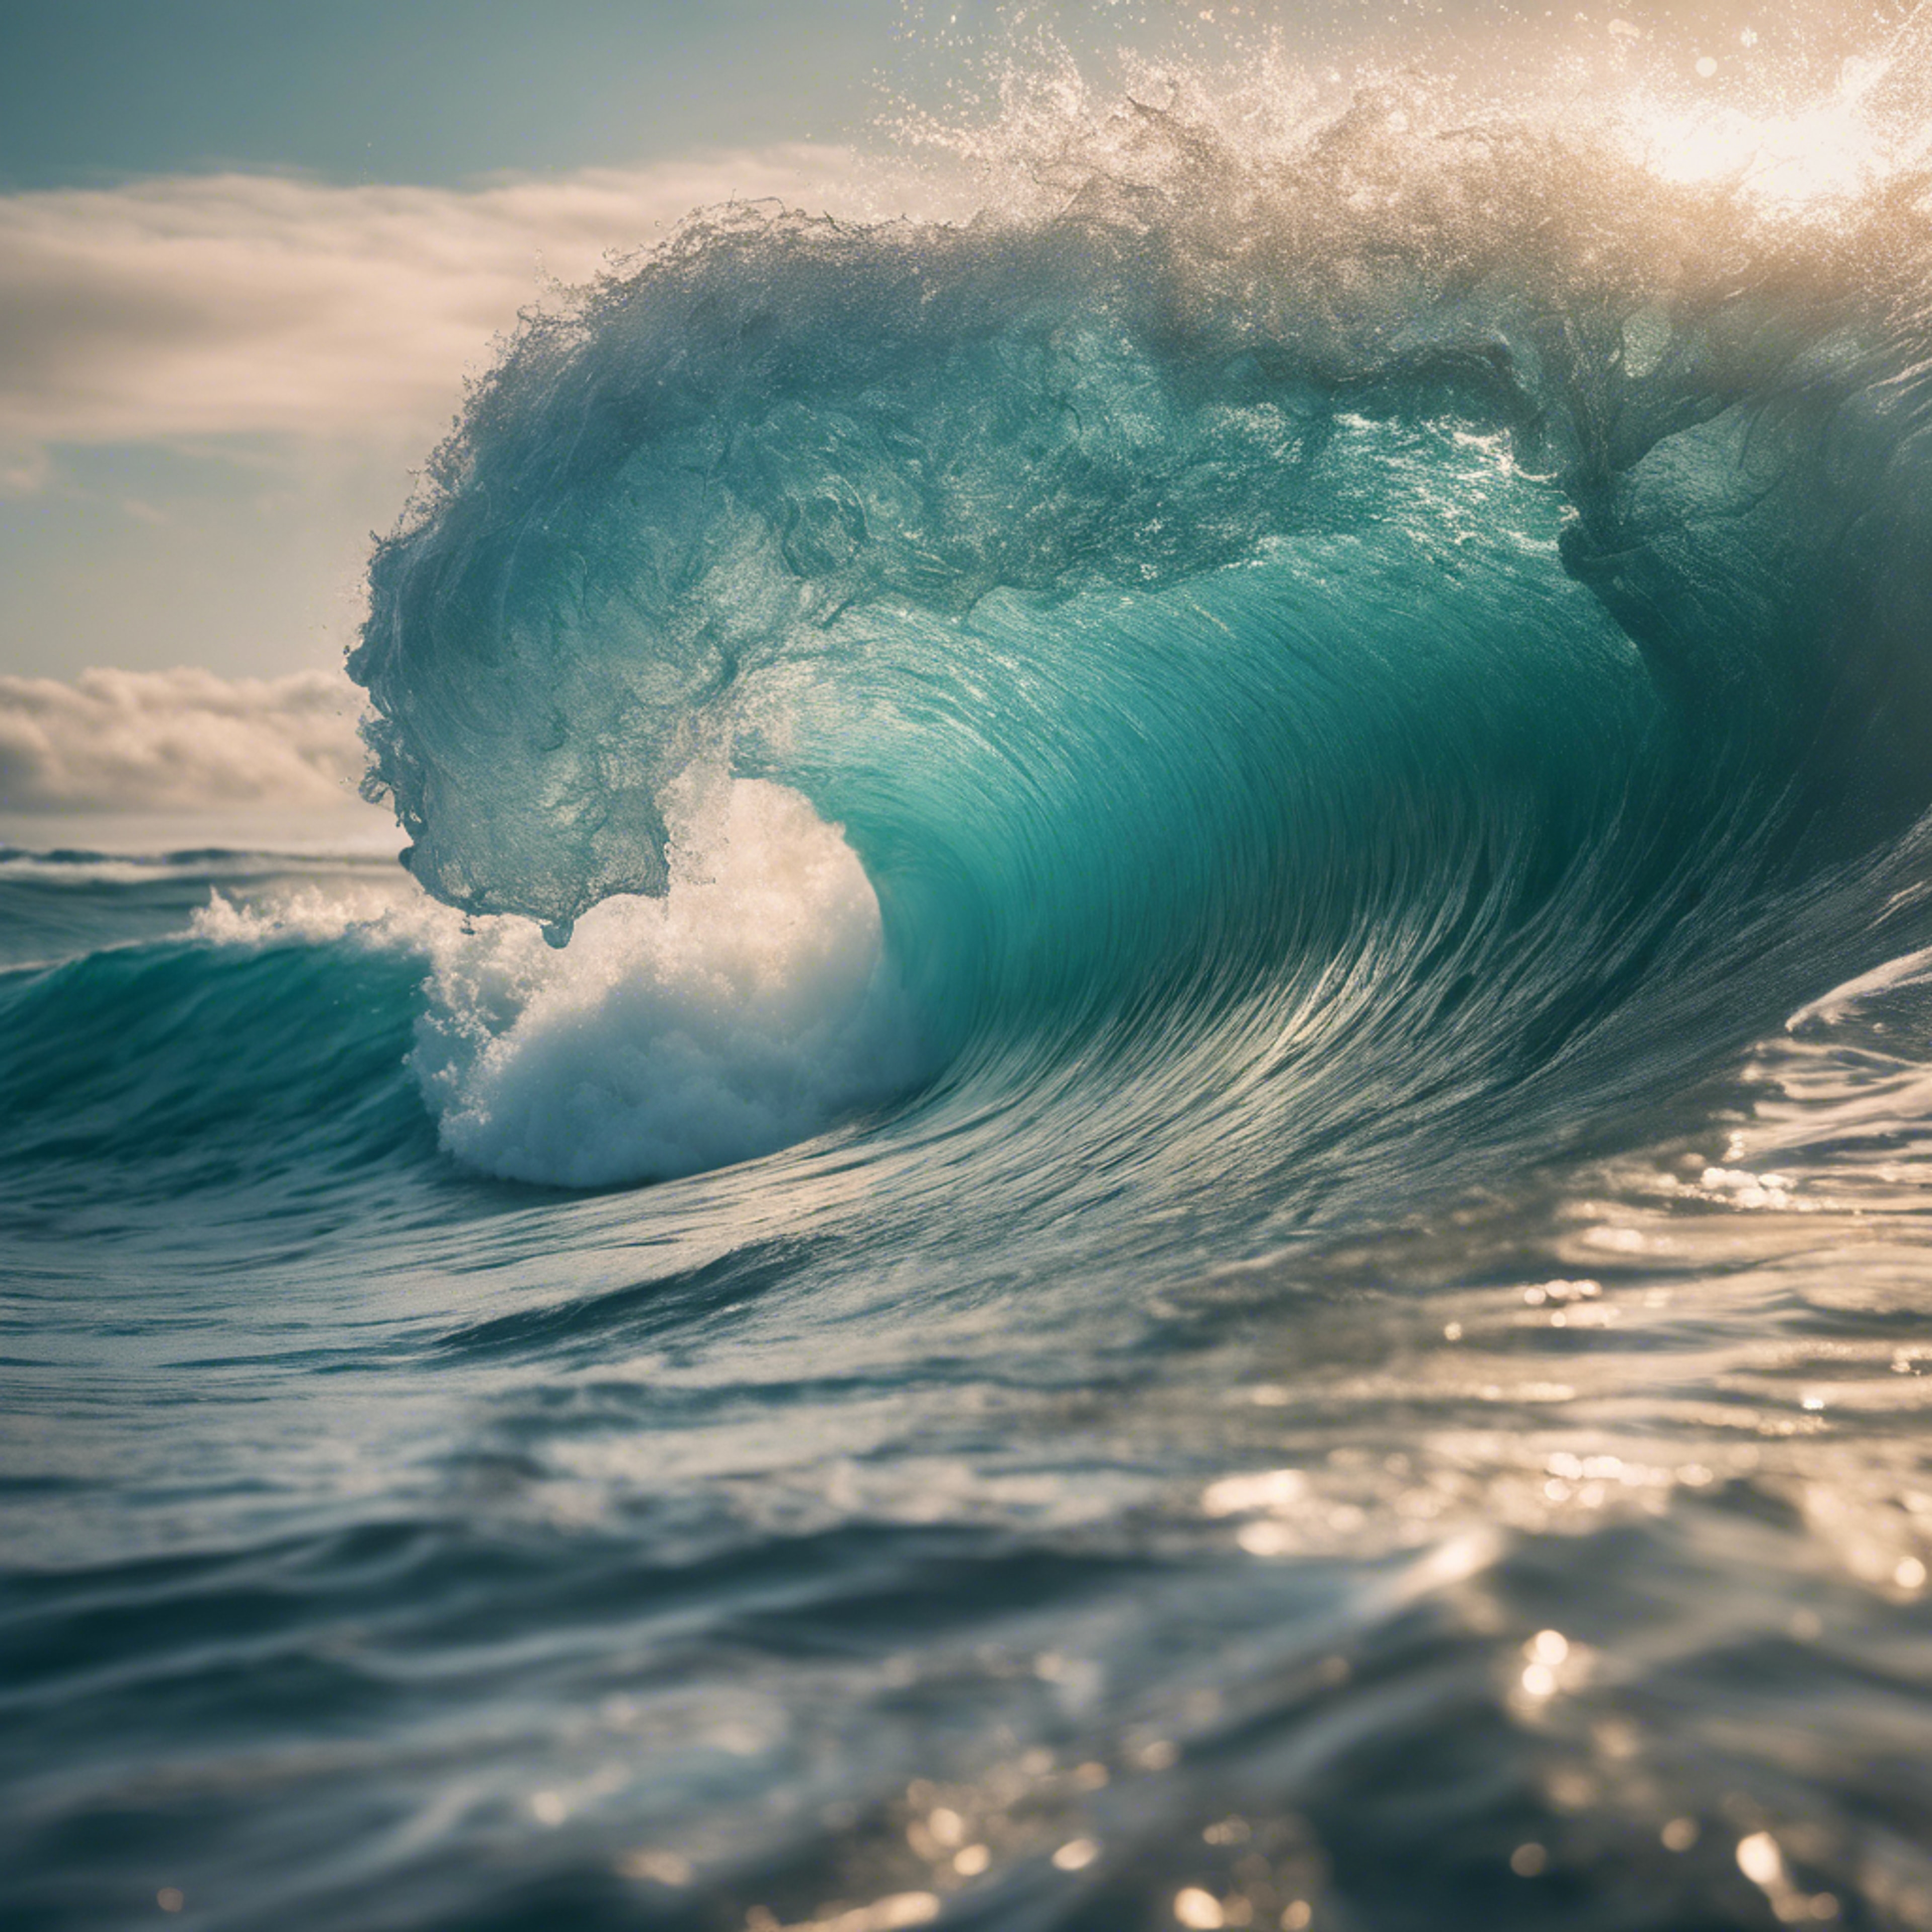 A powerful ocean wave about to crash, casting a cool teal hue. Tapeta[600fa377246440af9acb]